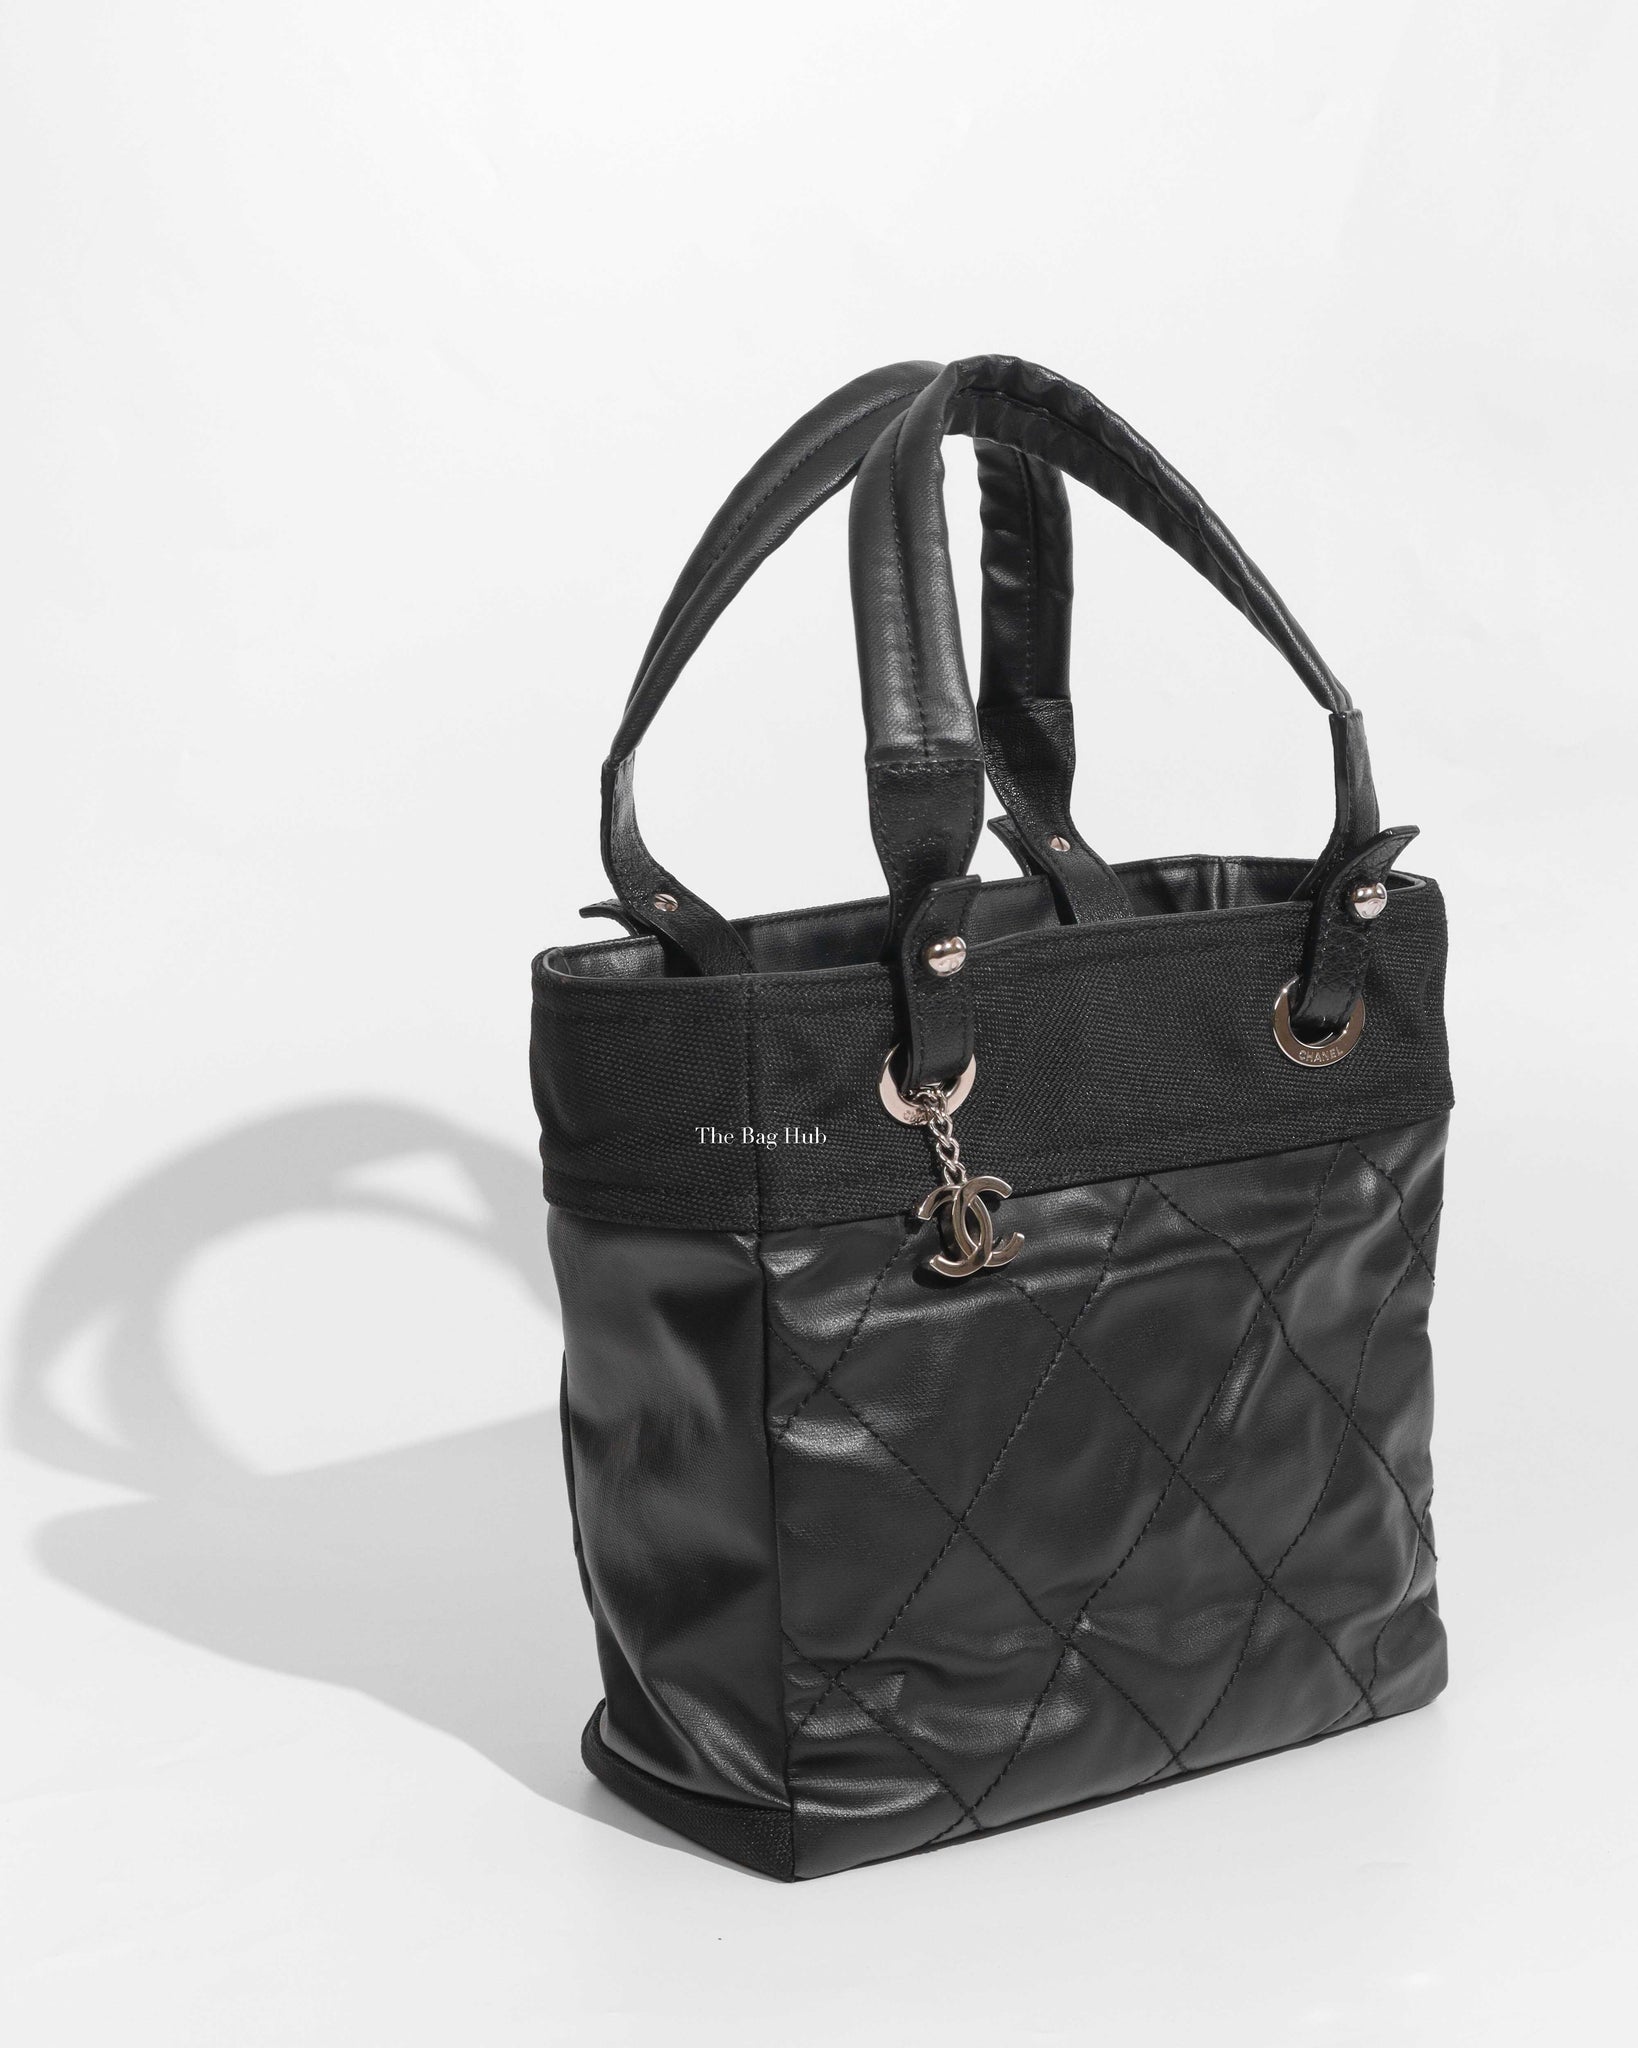 Chanel Black Quilted Coated and Canvas Paris Biarritz Petite